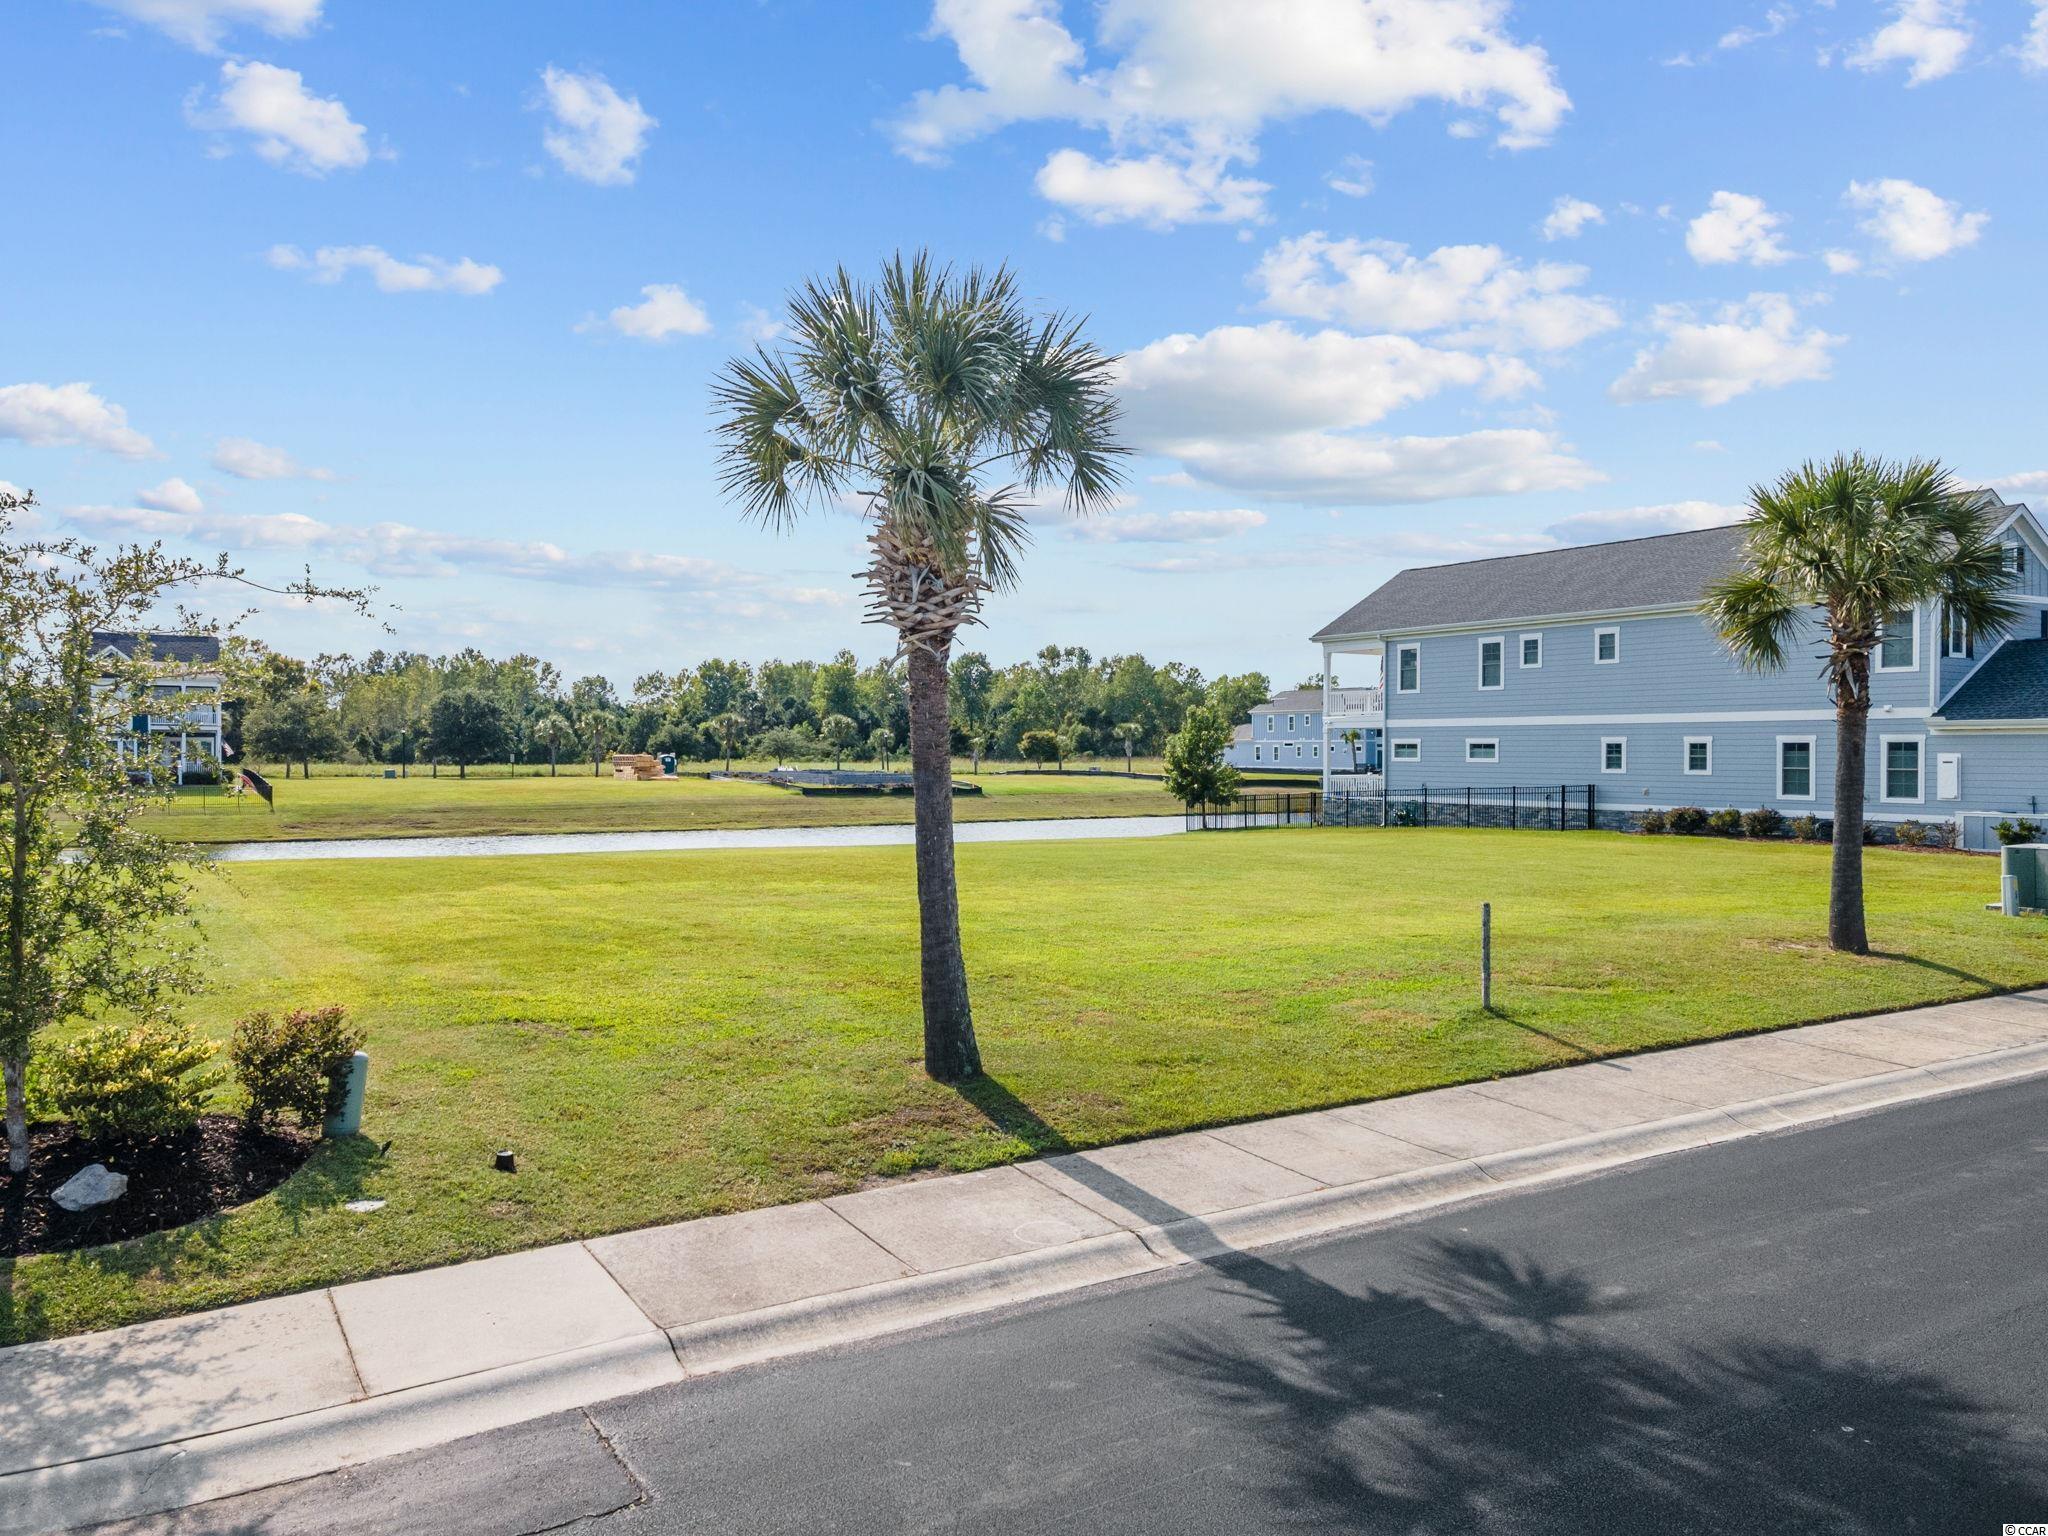 1109 Whispering Winds Dr. Myrtle Beach, SC 29579